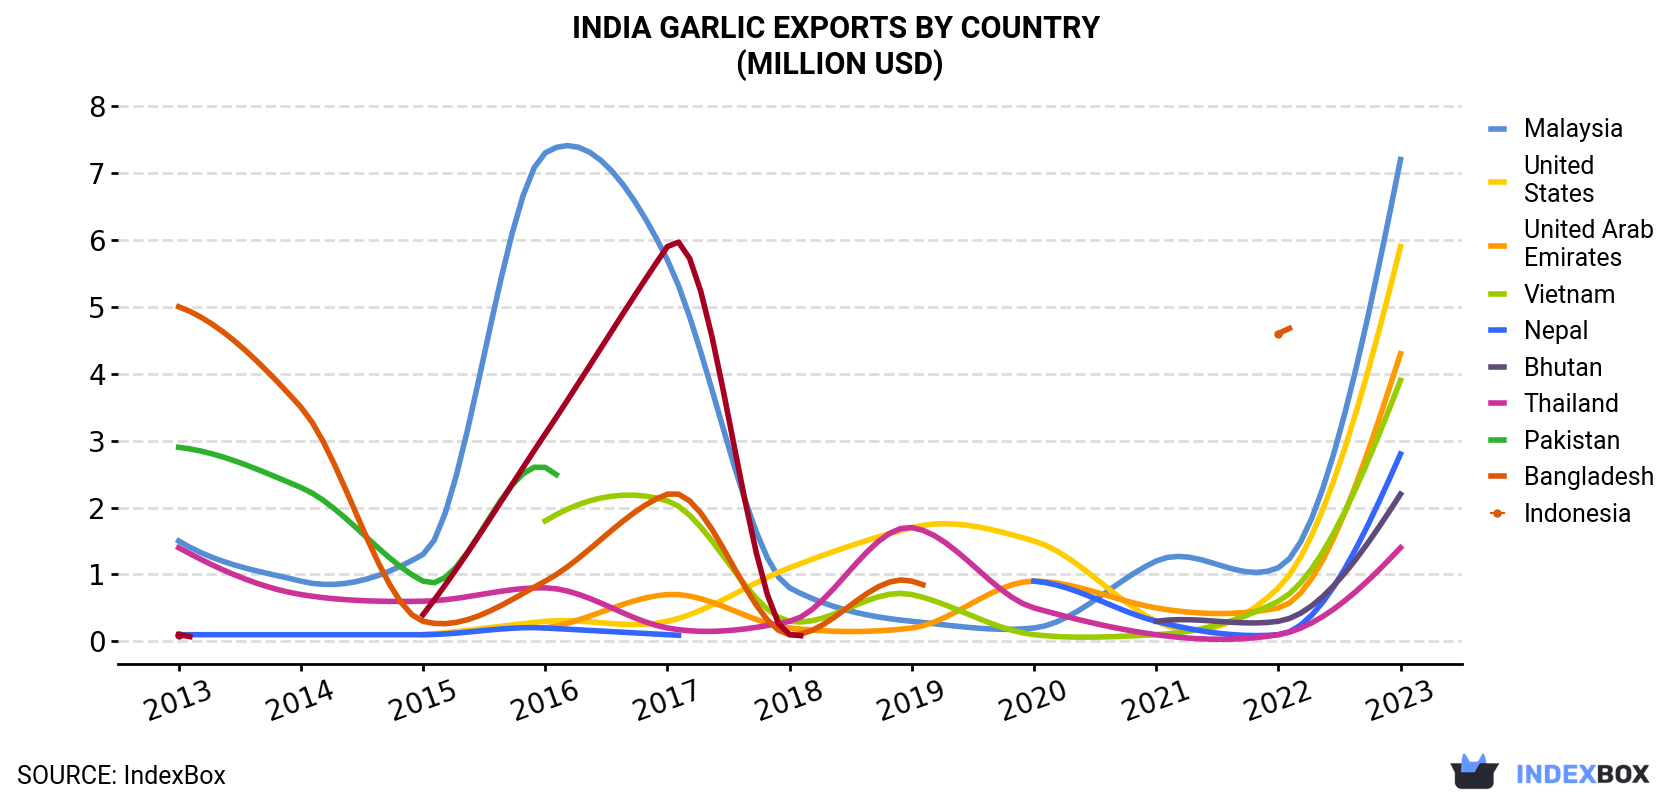 India Garlic Exports By Country (Million USD)